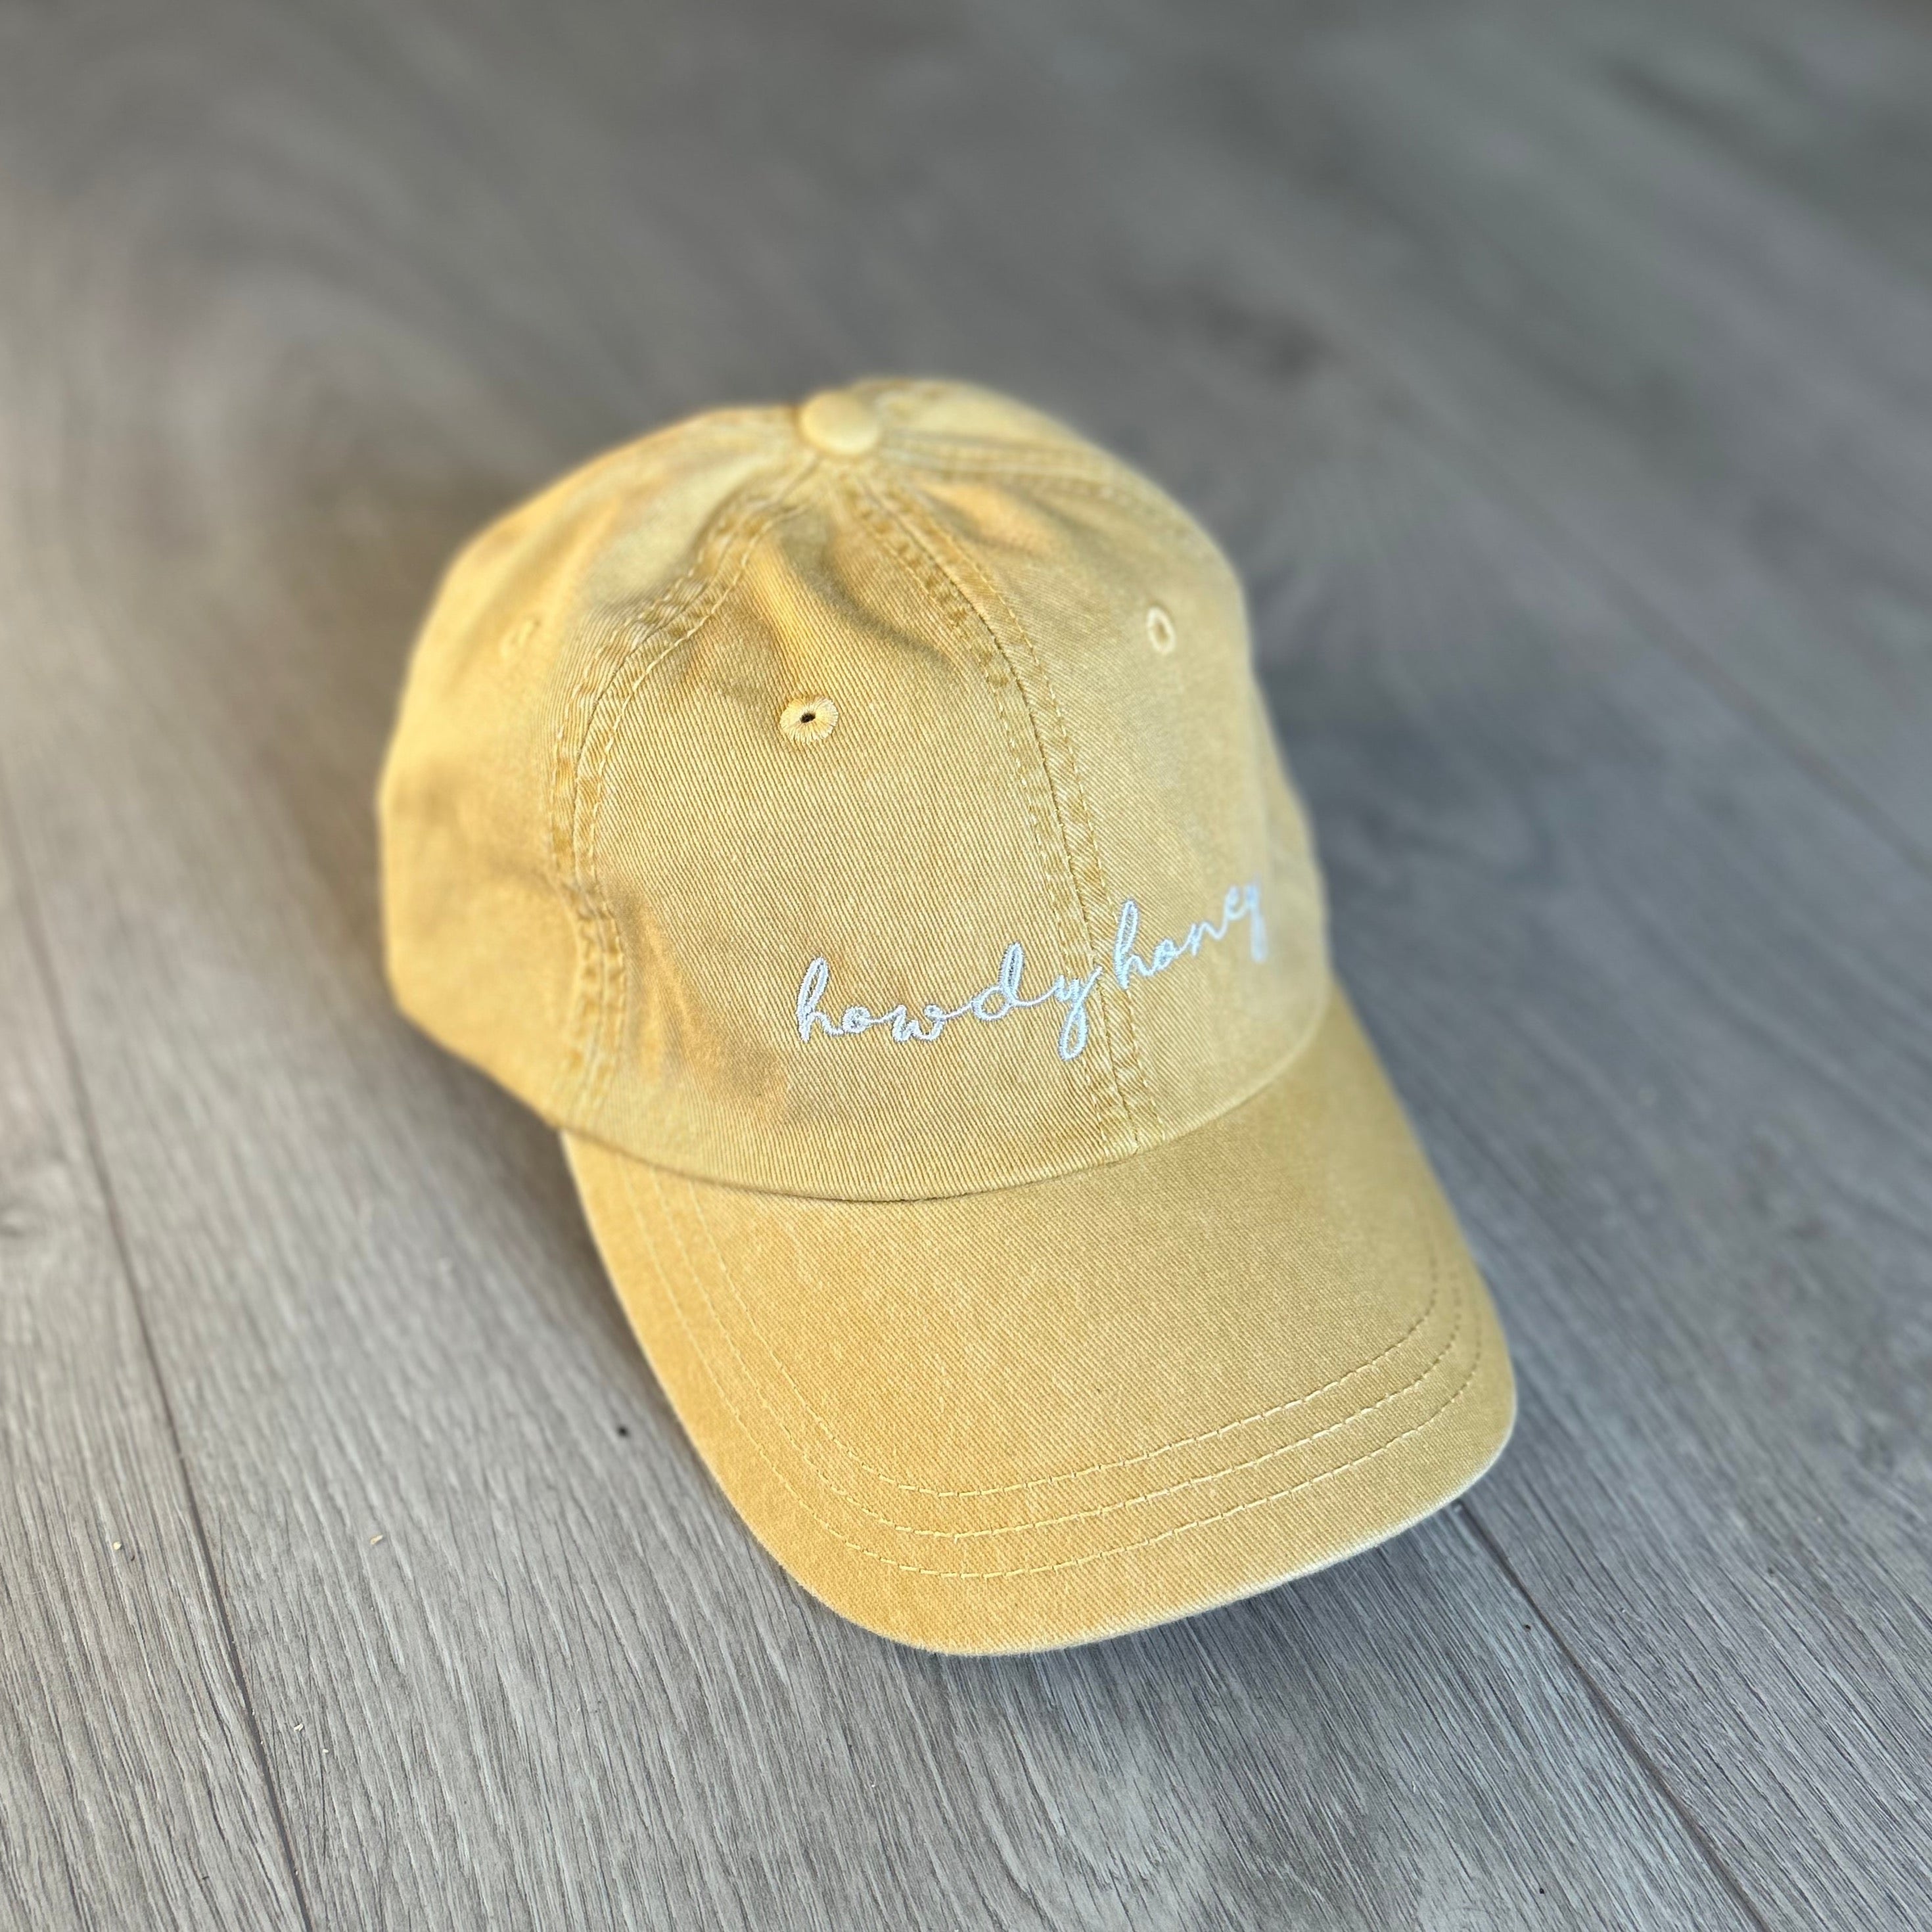 Yellow baseball cap with embroidered text "Howdy Honey" in white 